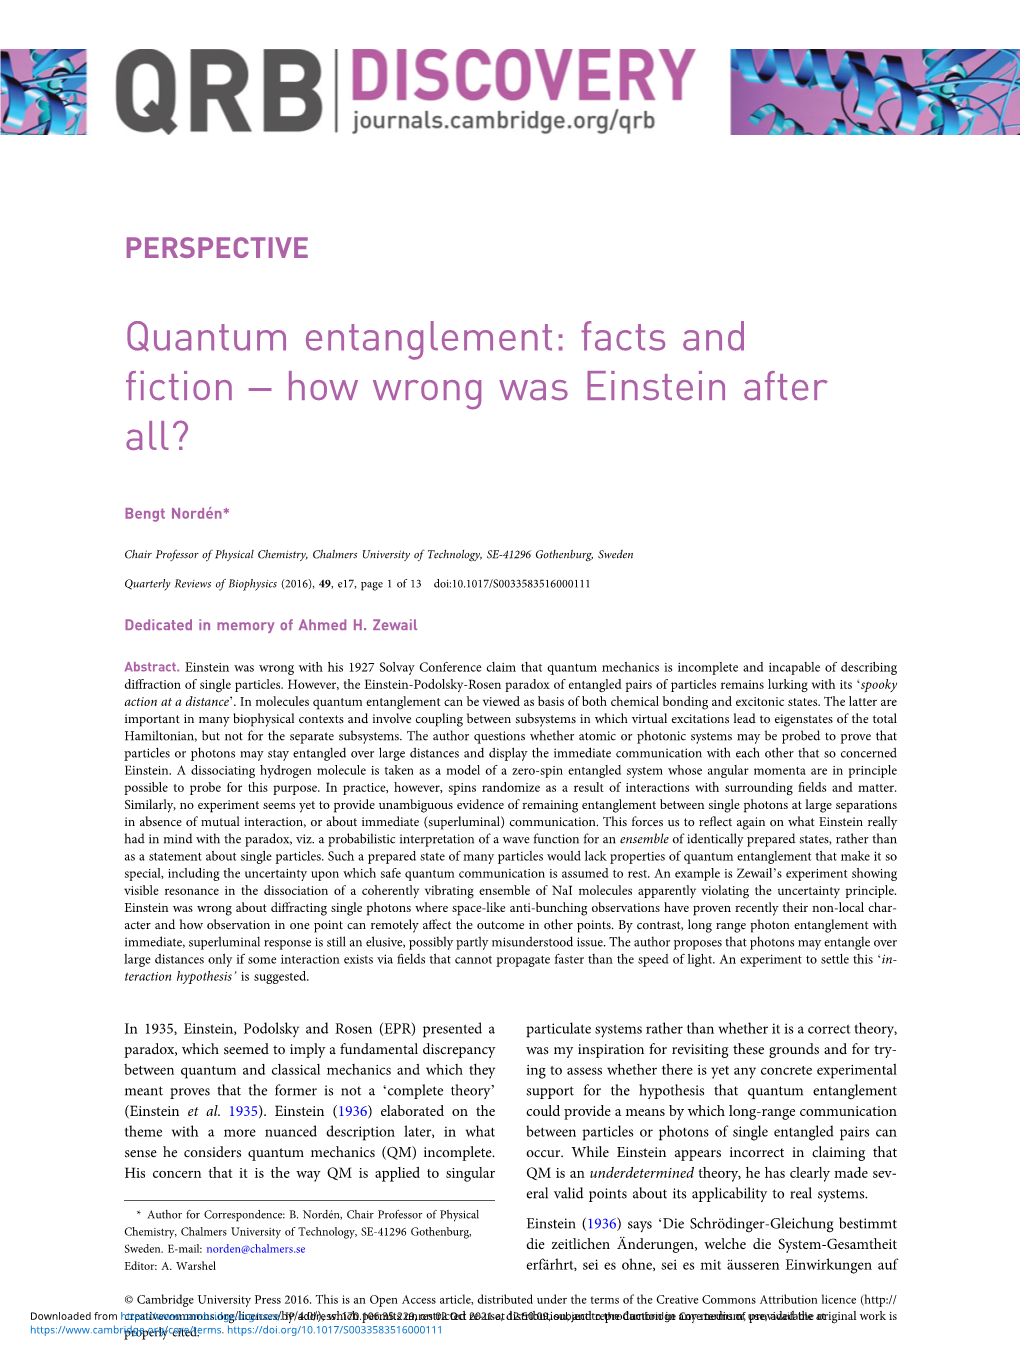 Quantum Entanglement: Facts and Fiction – How Wrong Was Einstein